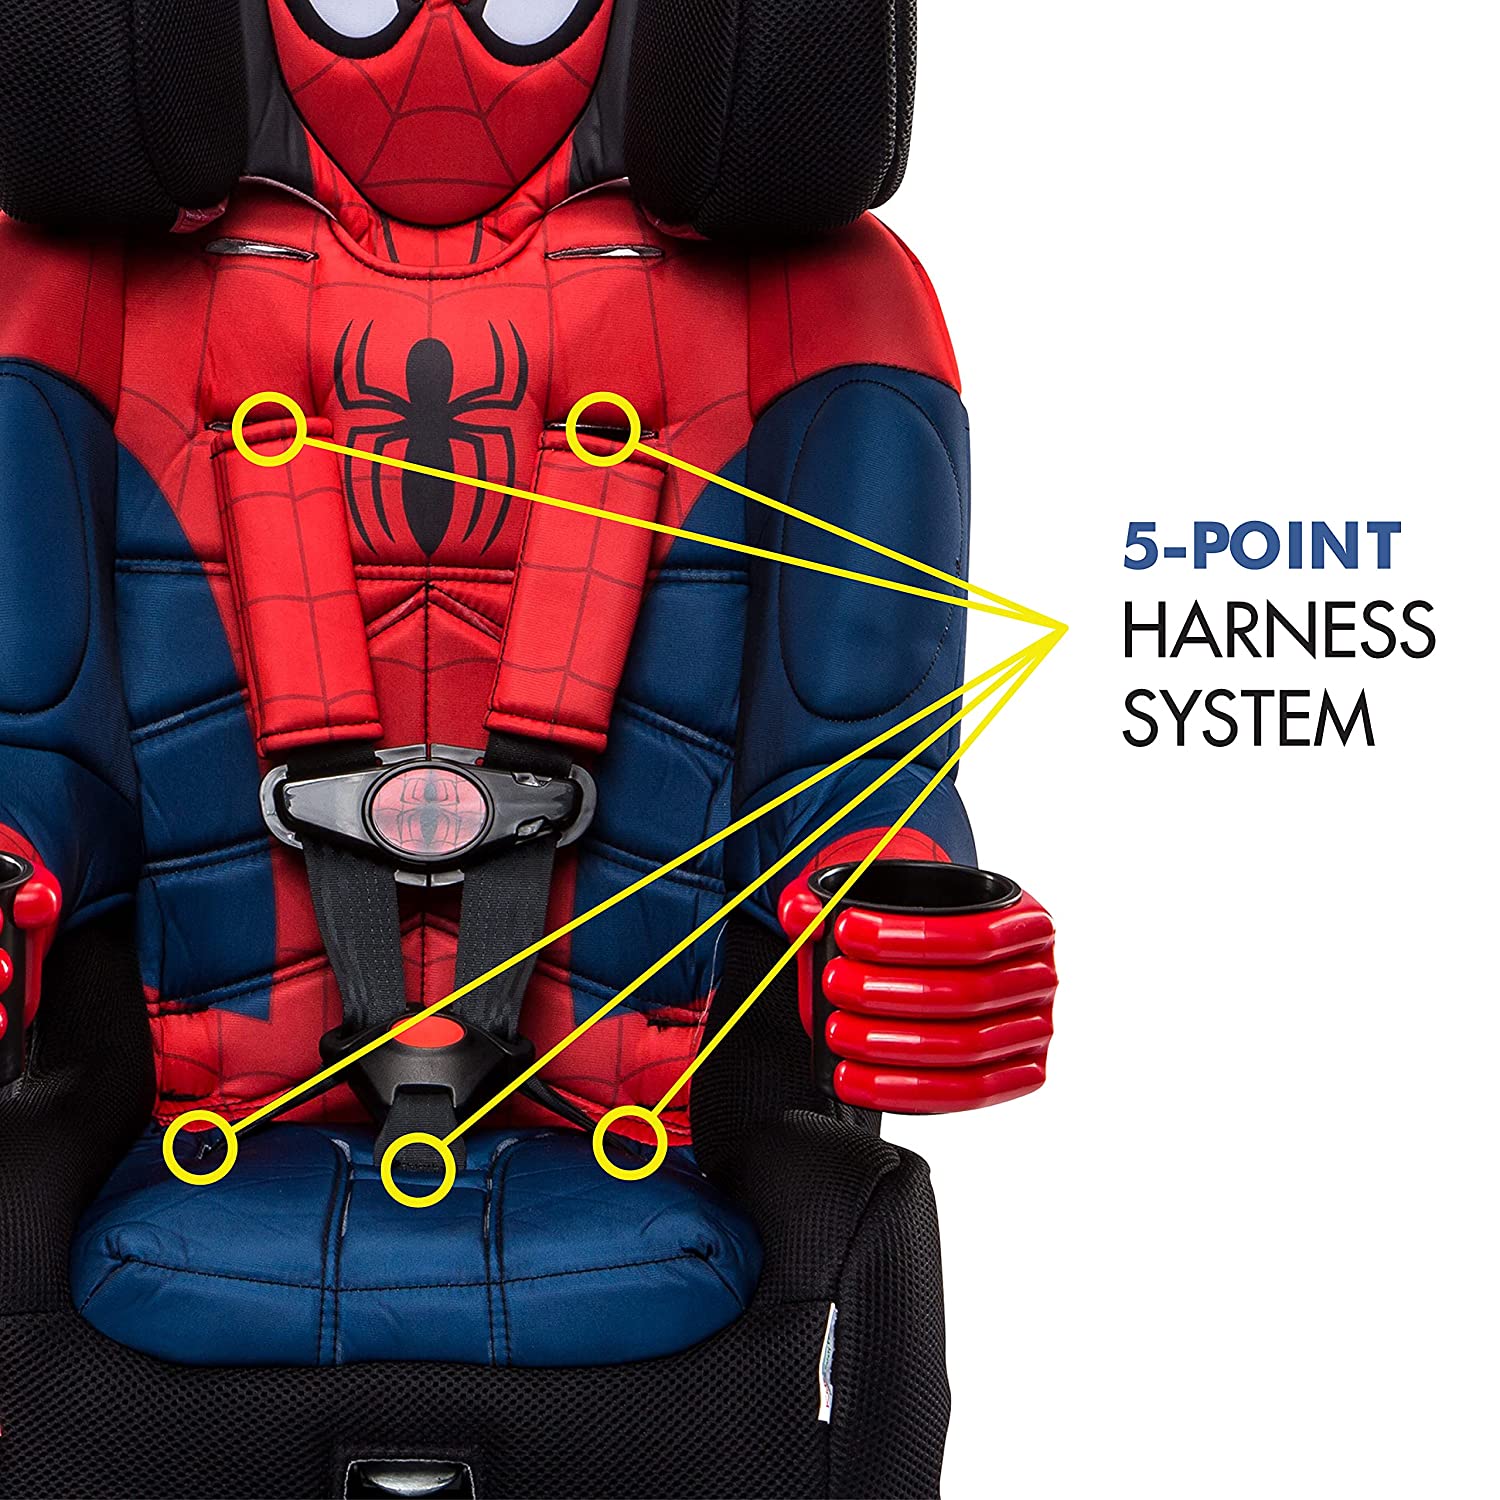 KidsEmbrace 2-in-1 Forward Facing Harness Booster Seat, Astronaut